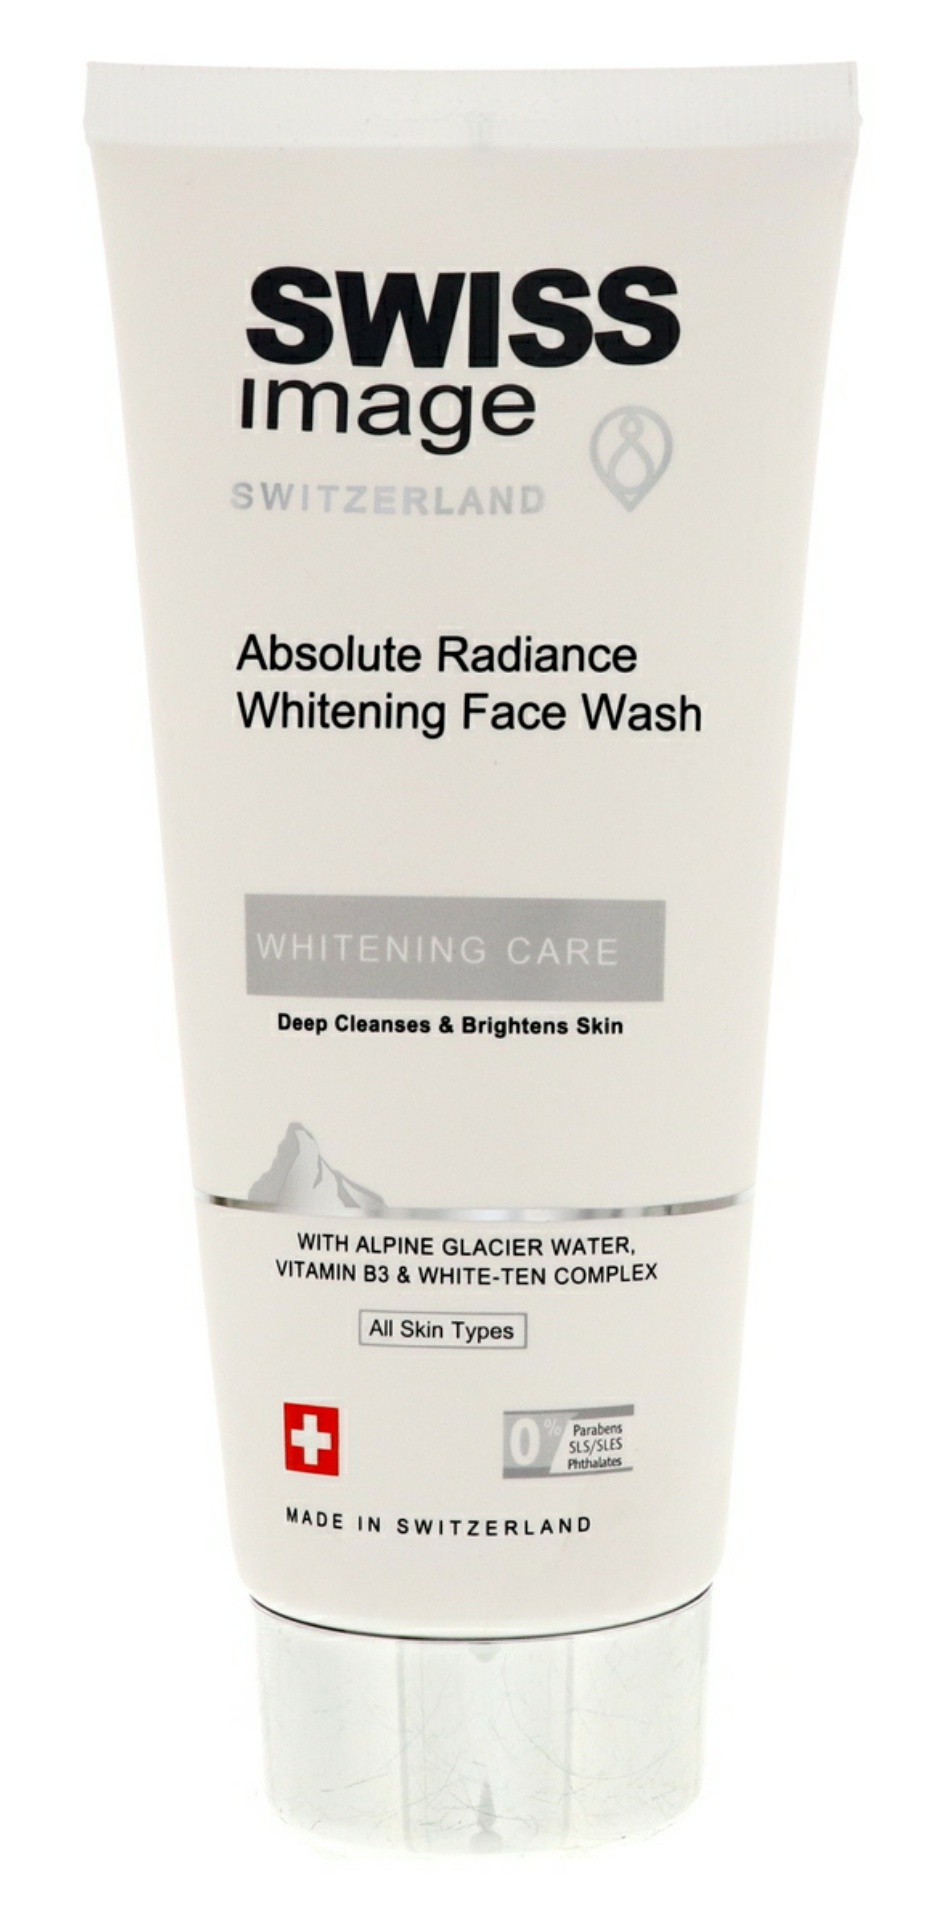 Swiss Image Absolute Radiance Whitening Face Wash